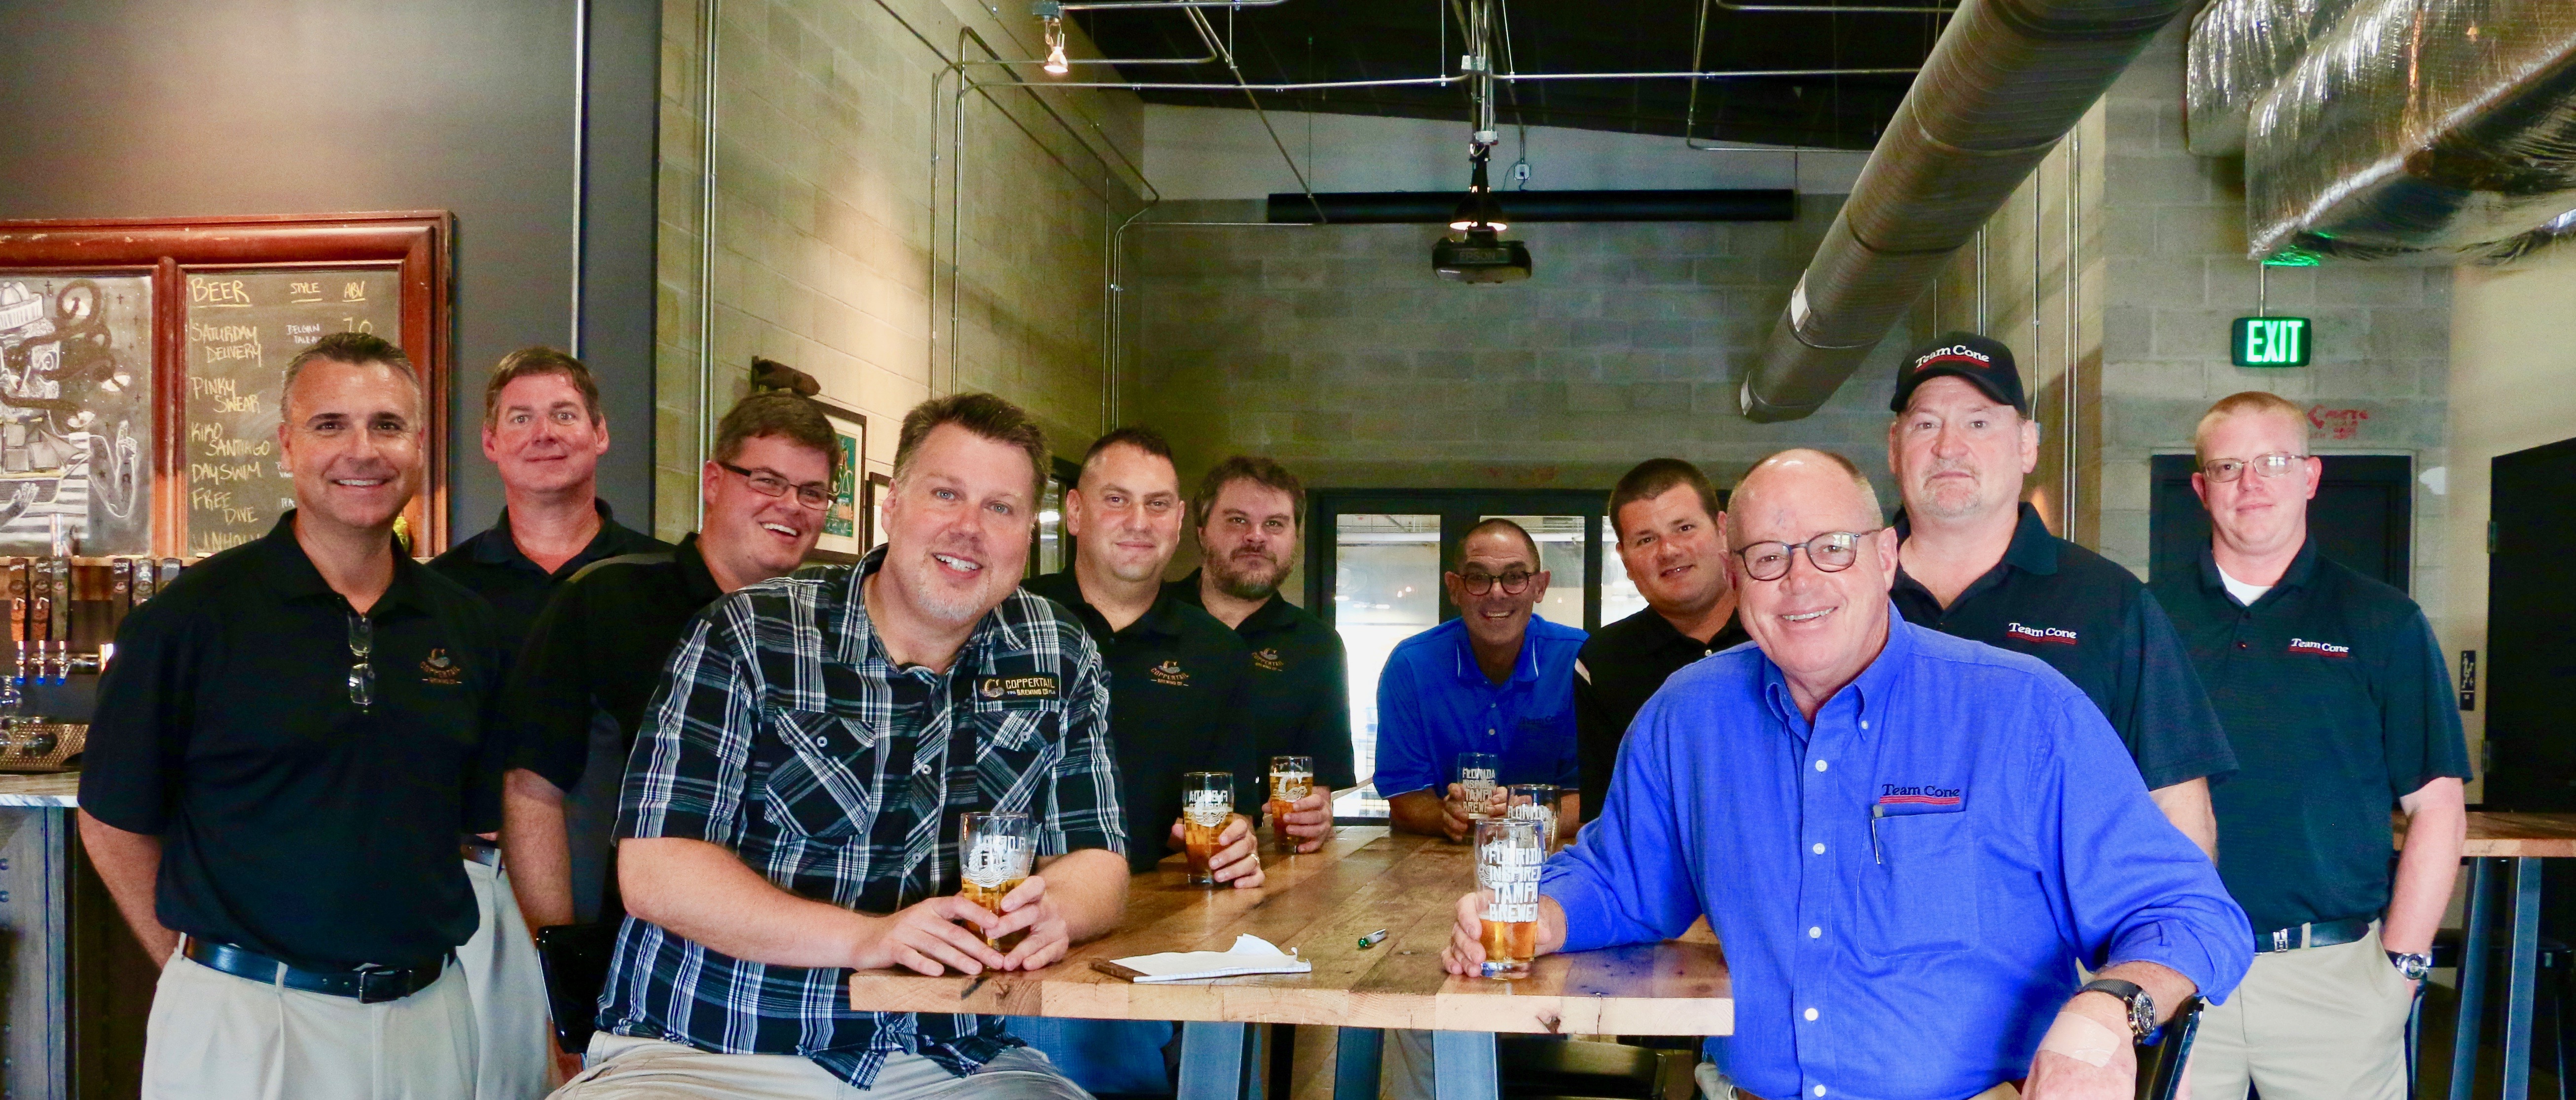 Team Cone and Coppertail Brewing